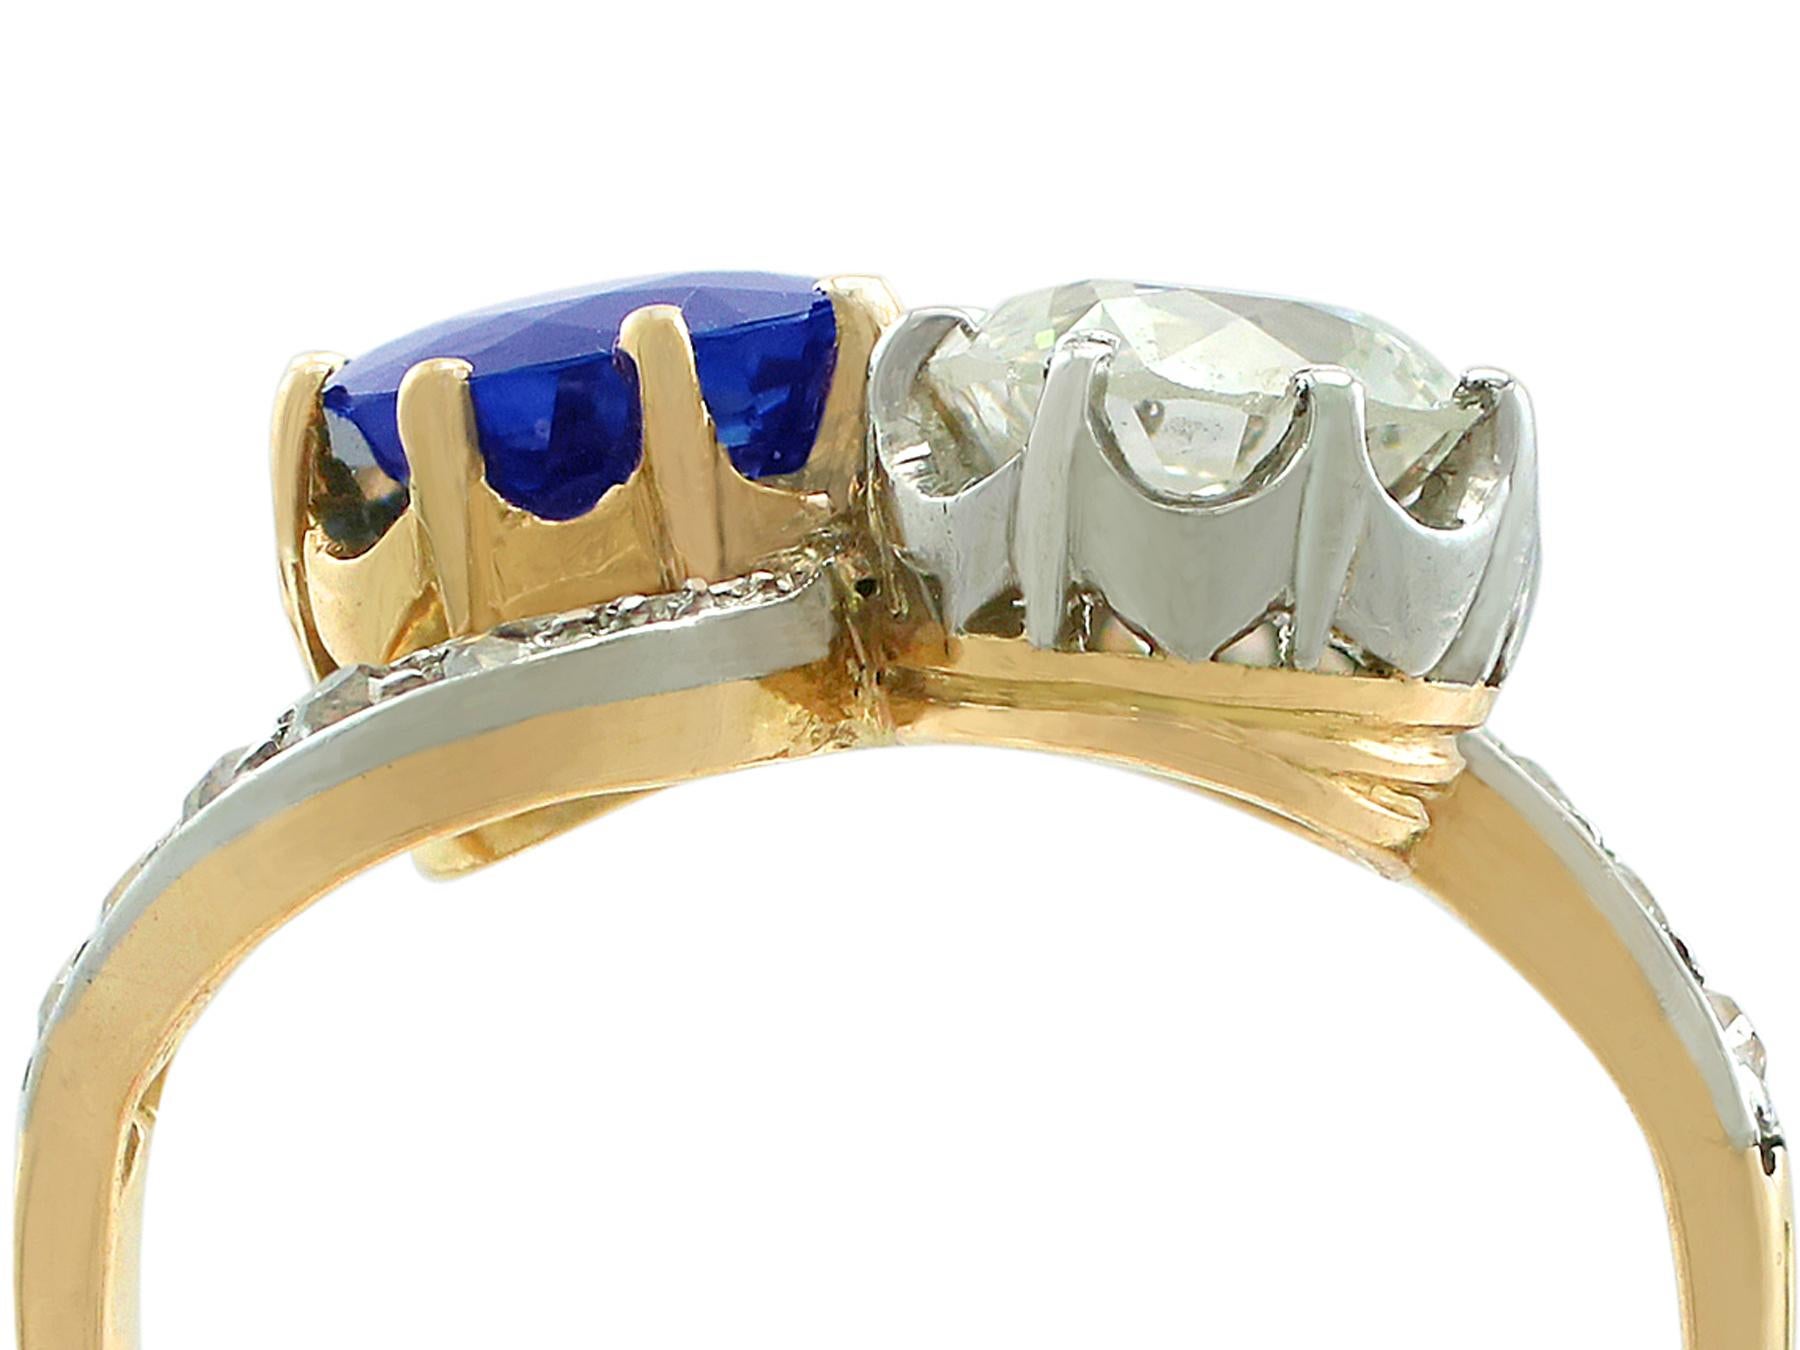 A stunning, fine and impressive antique 1.34Ct diamond (total) and 1.55 carat blue sapphire, 18k yellow gold twist ring; part of our antique jewelry collection.

This stunning, fine and impressive sapphire and diamond twist ring has been crafted in